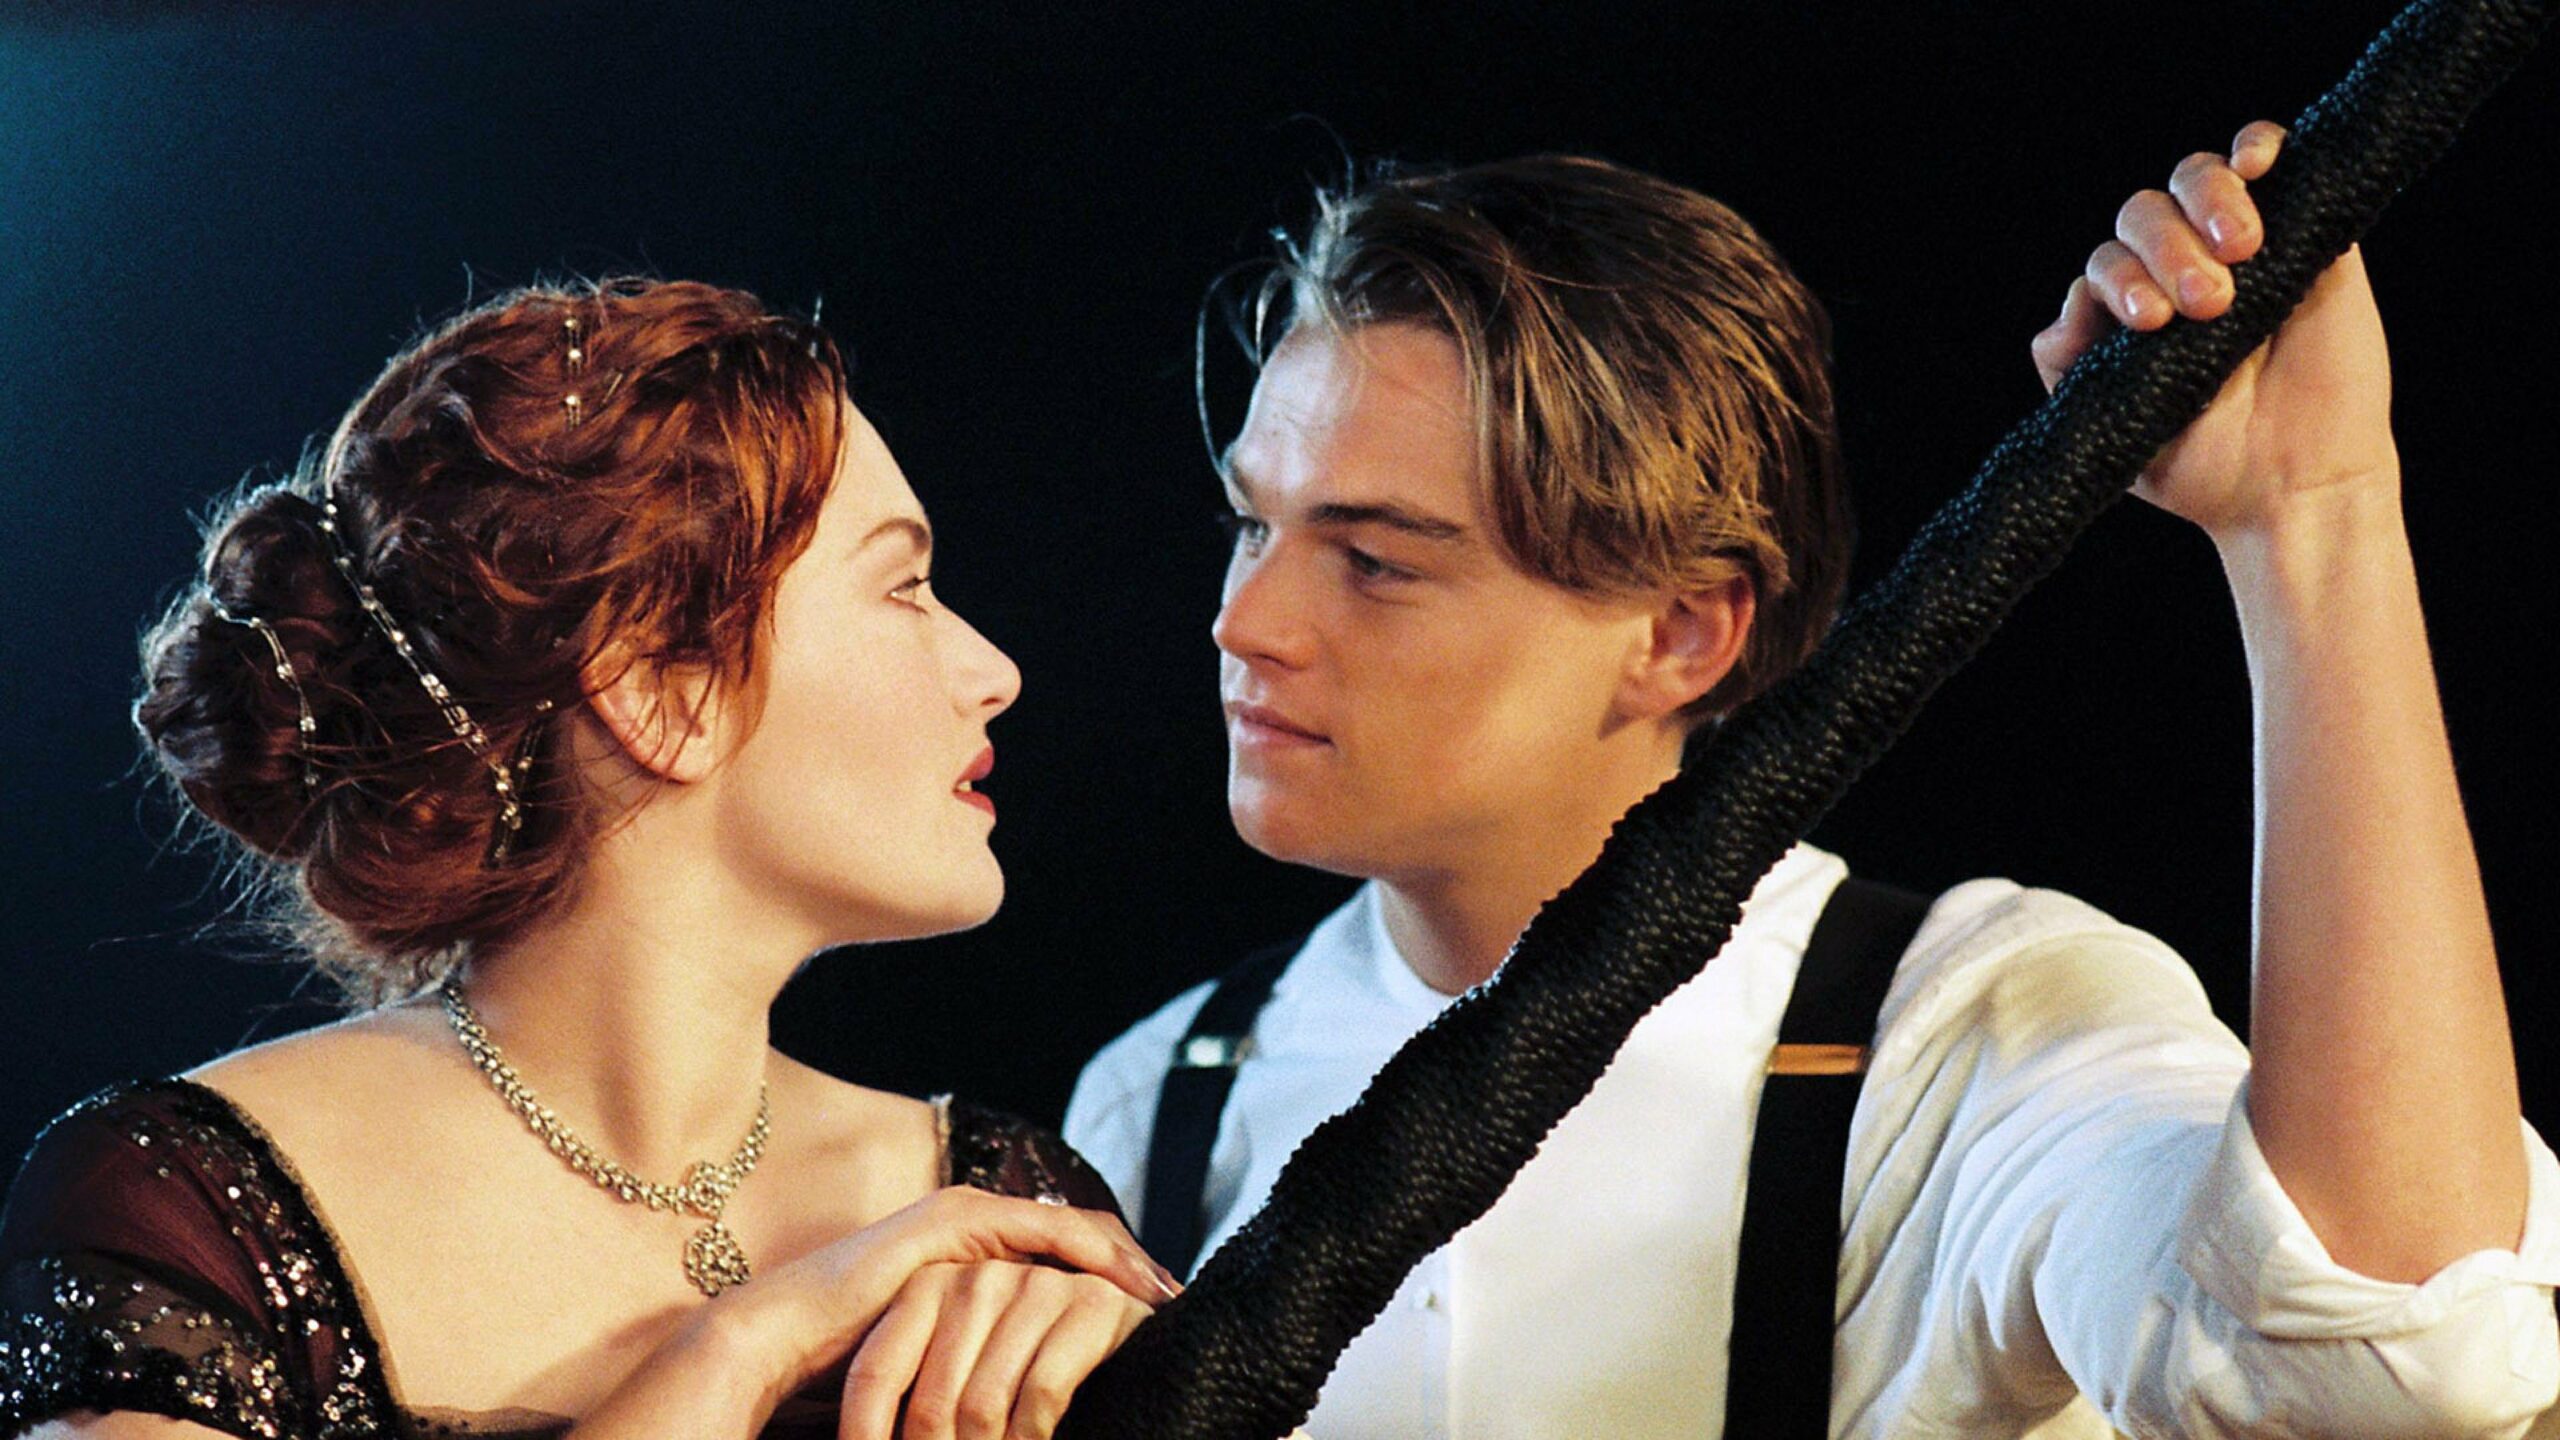 A Deleted Scene From The Titanic Has Been Discovered And It Will Break Your Heart